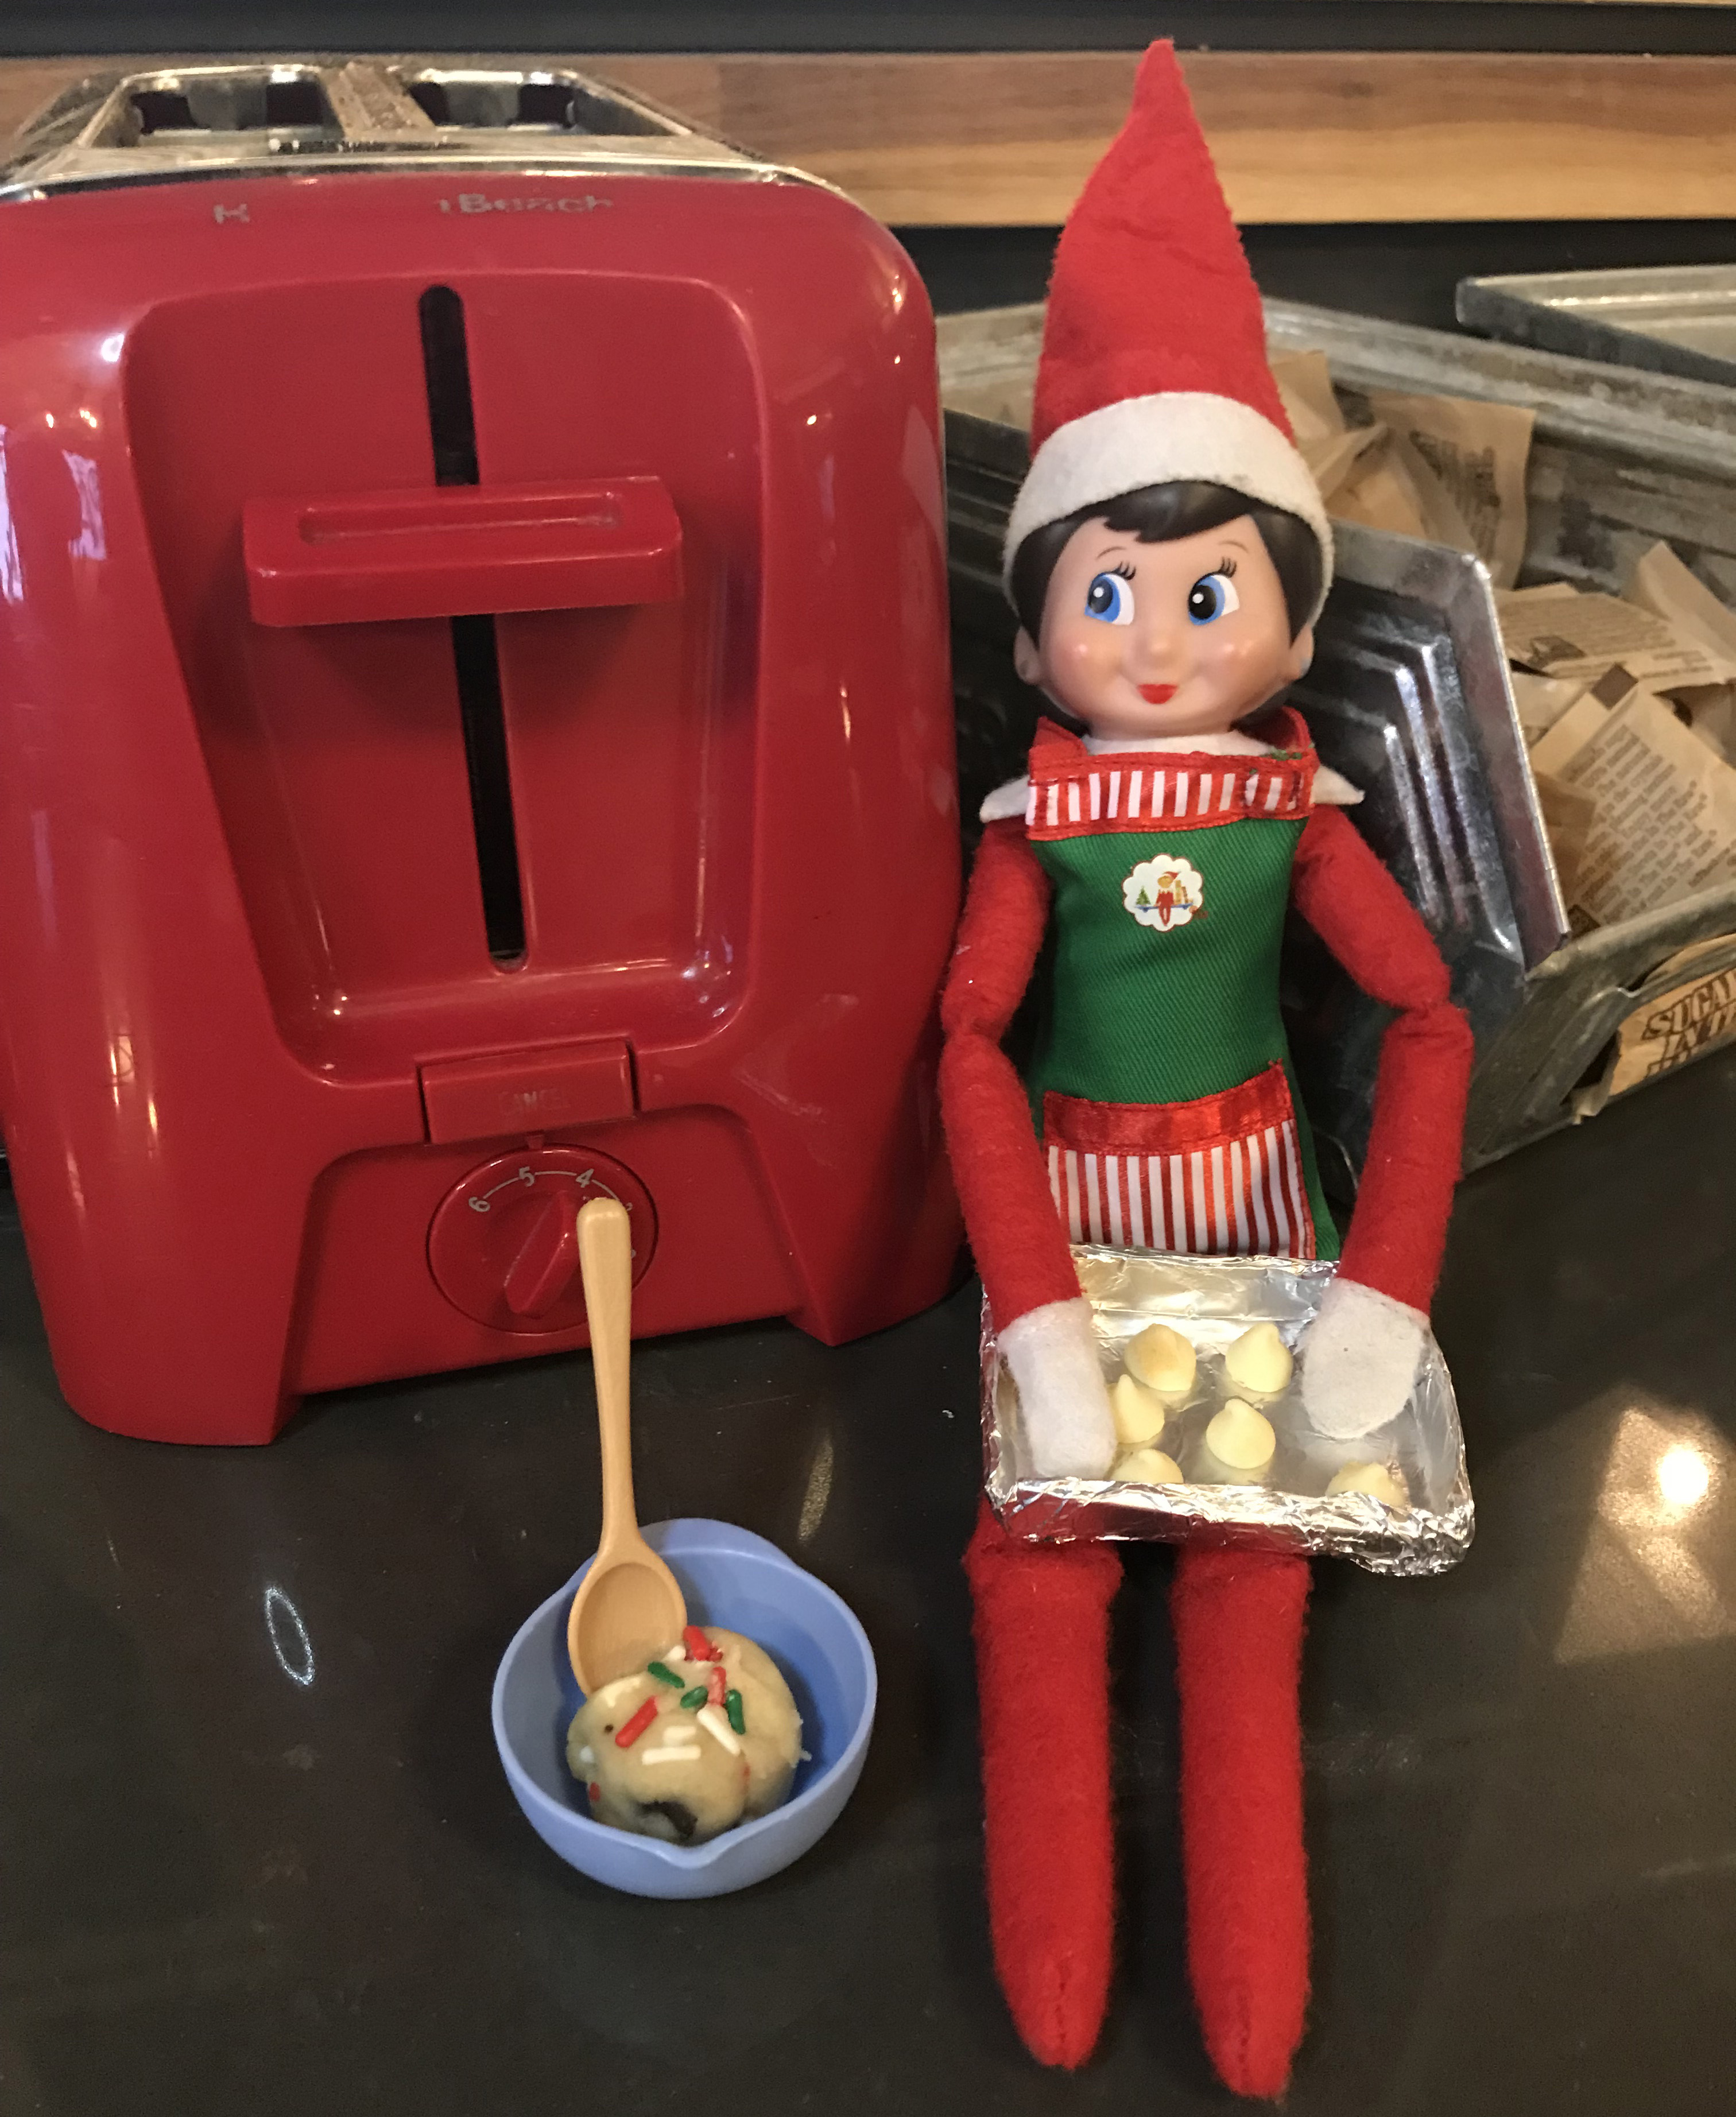 Elf On The Shelf Ideas You Can Try Out: See The Photos | J-14